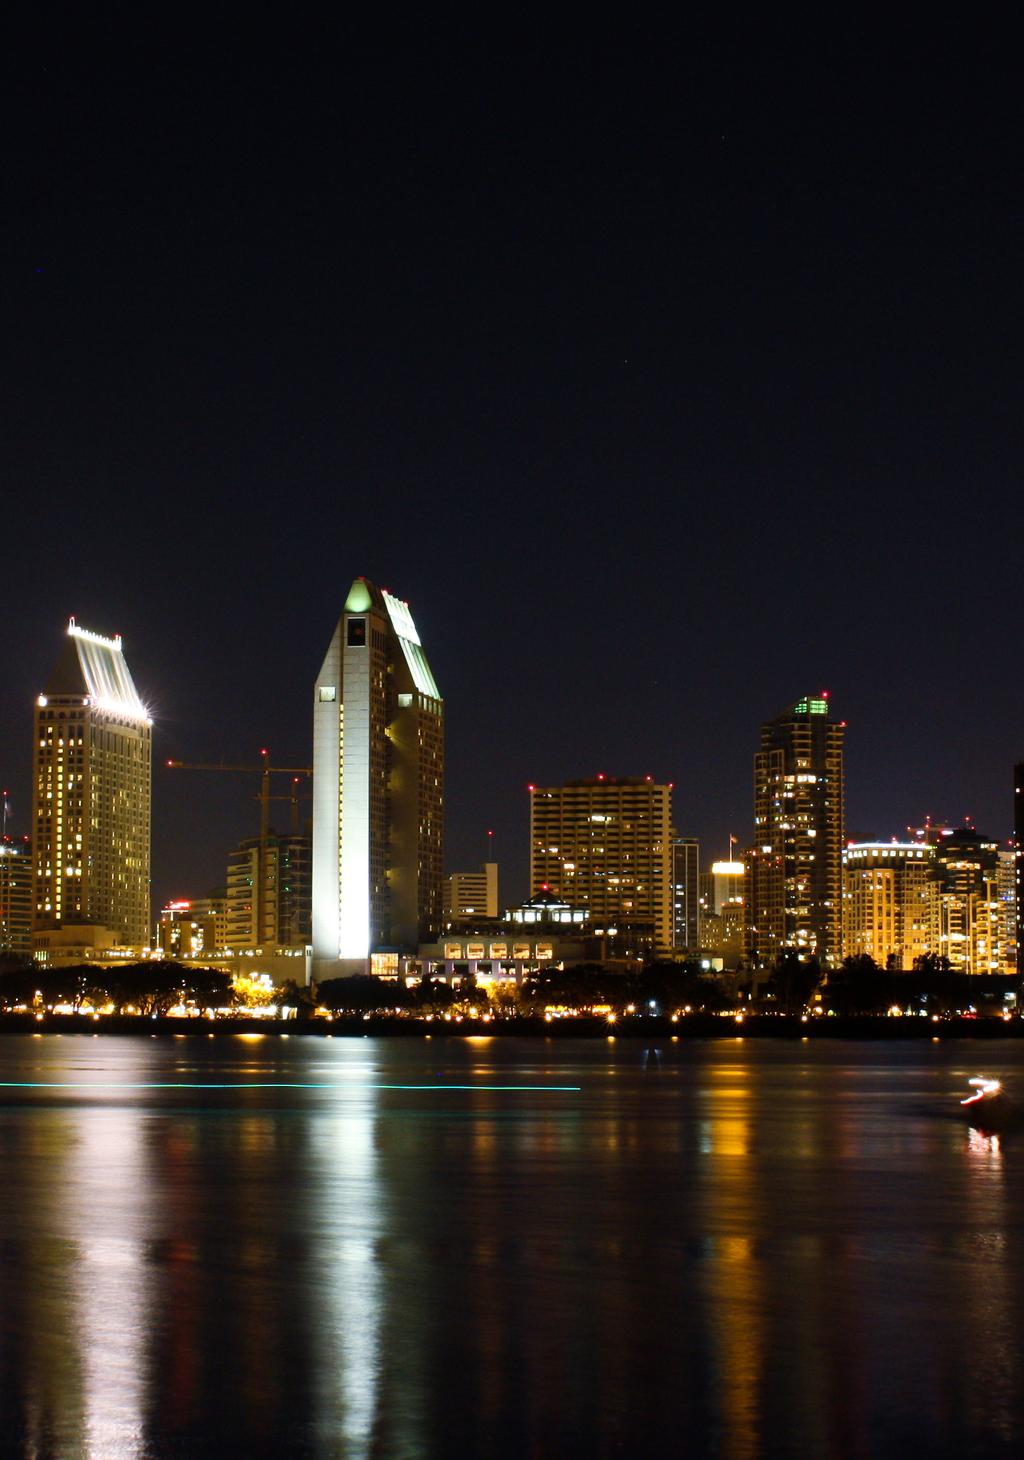 SAN DIEGO, USA The second largest city in California, San Diego is a thriving cultural, scientific, and educational center.